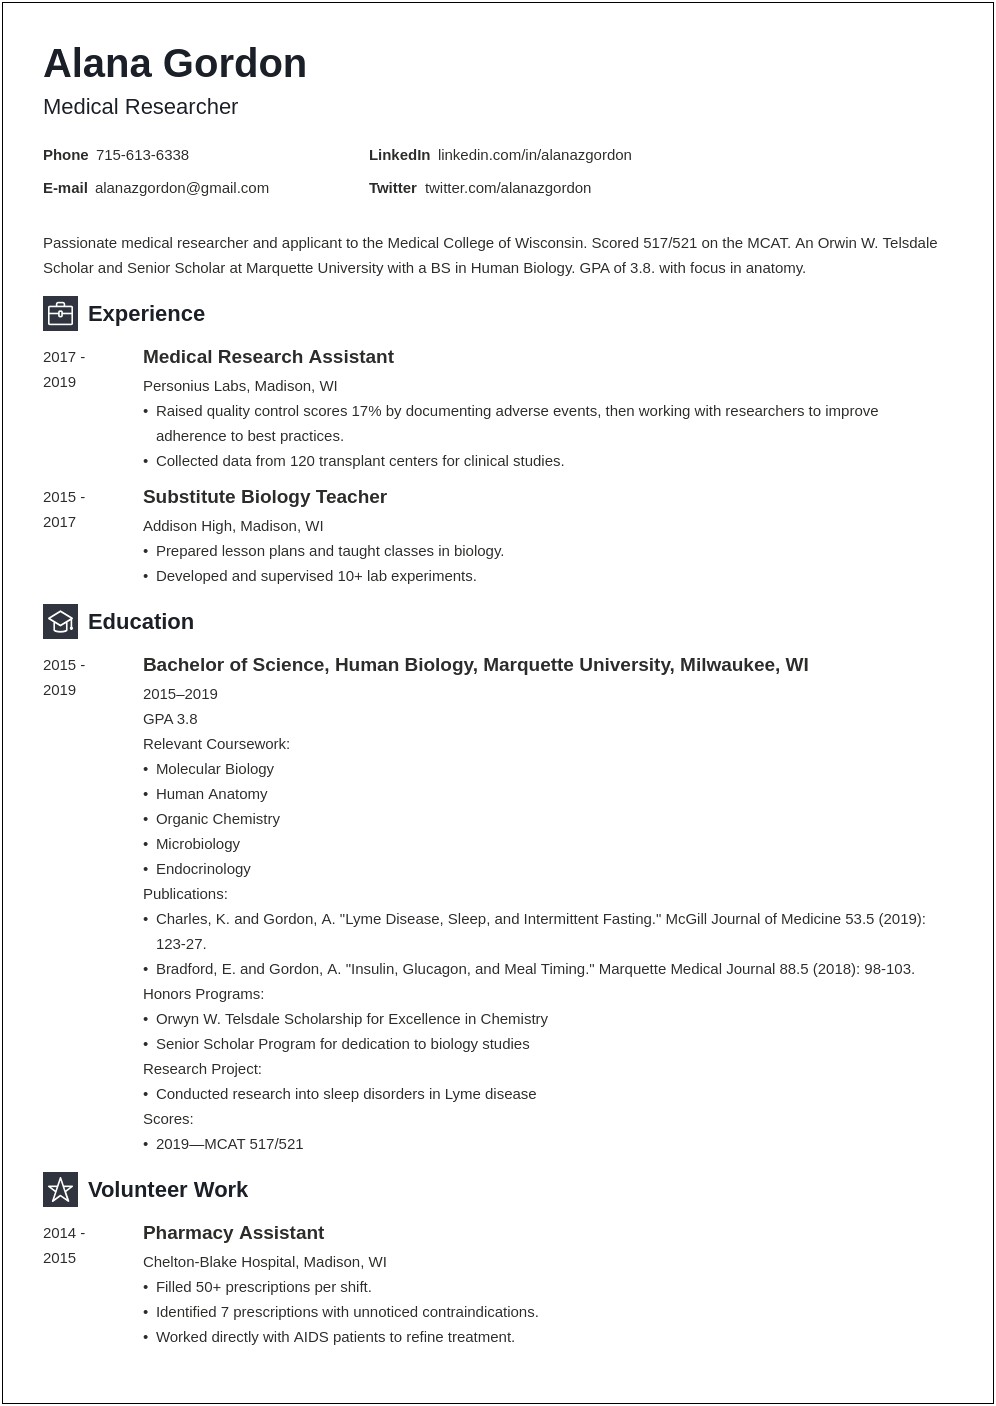 Jobs Mentioning Dropping Out Of Med School Resume